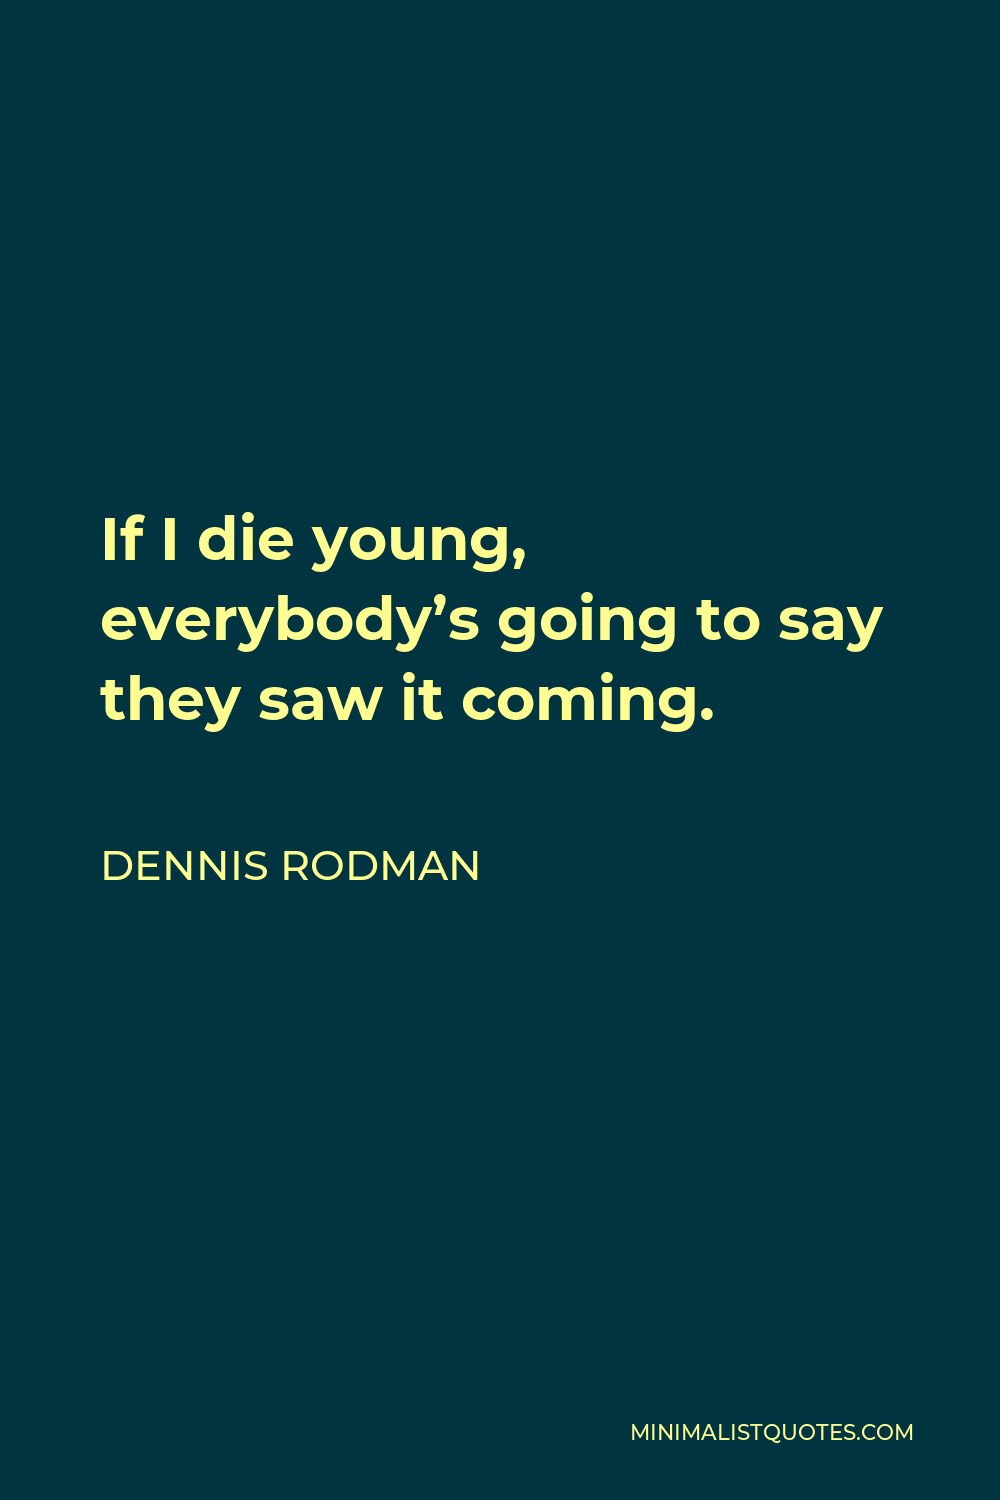 Dennis Rodman Quote - If I die young, everybody’s going to say they saw it coming.